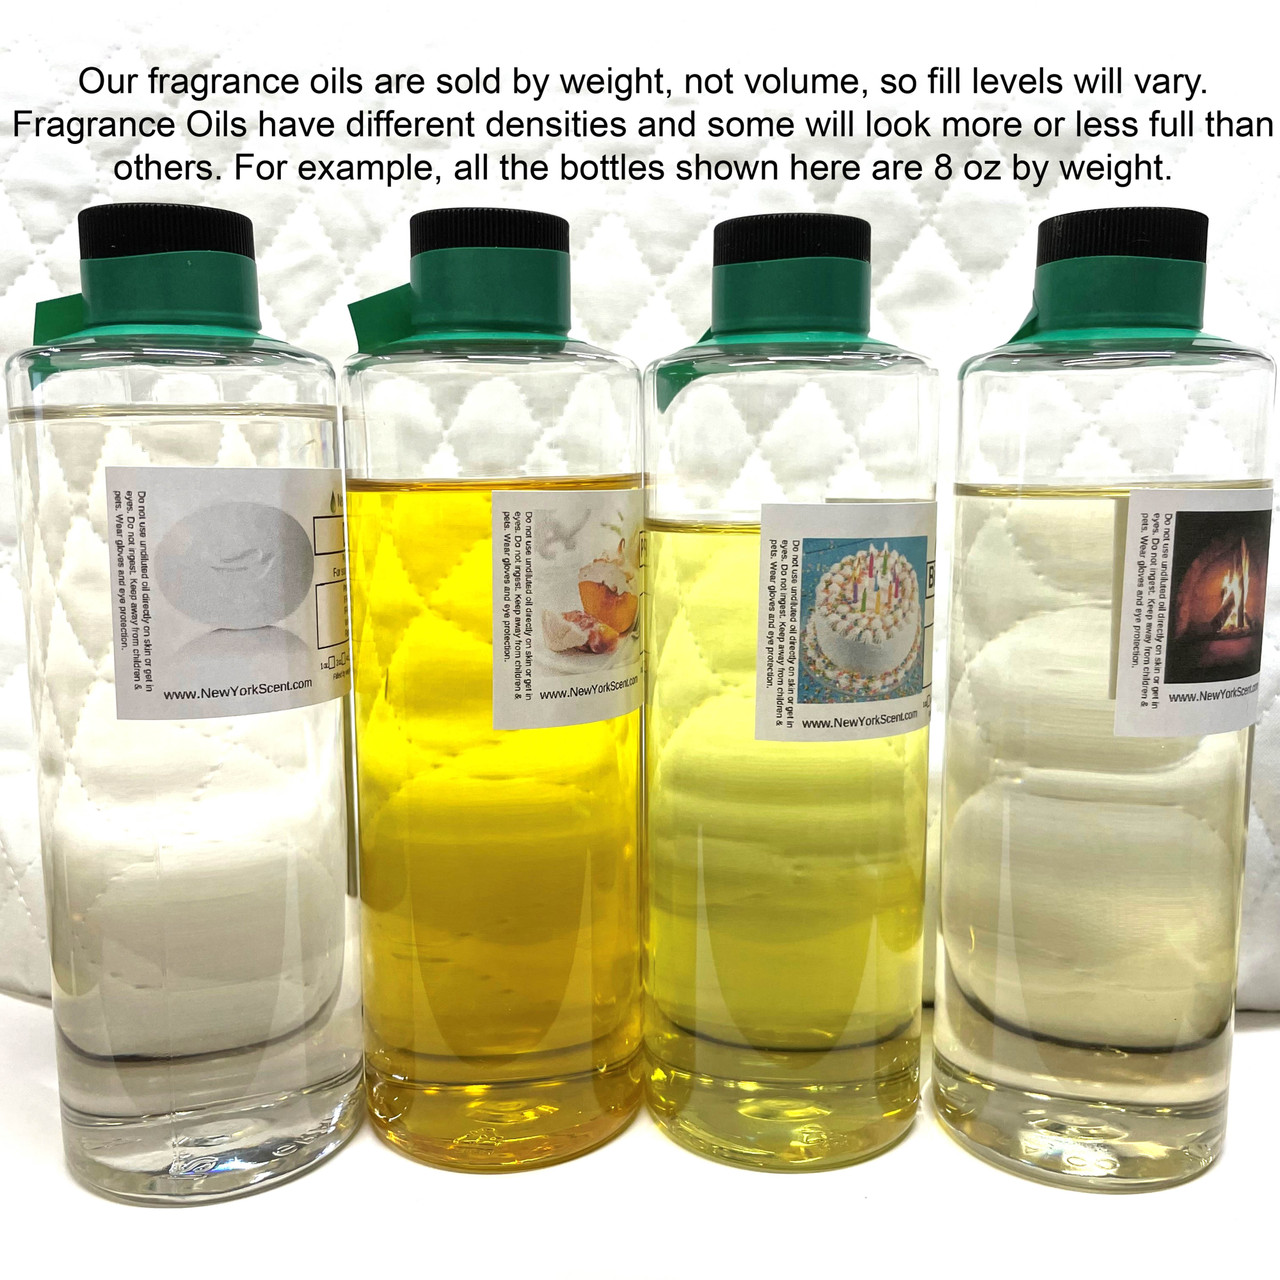 Bakery Fragrance Oils, Holamay Scented Oils for Soap Nepal